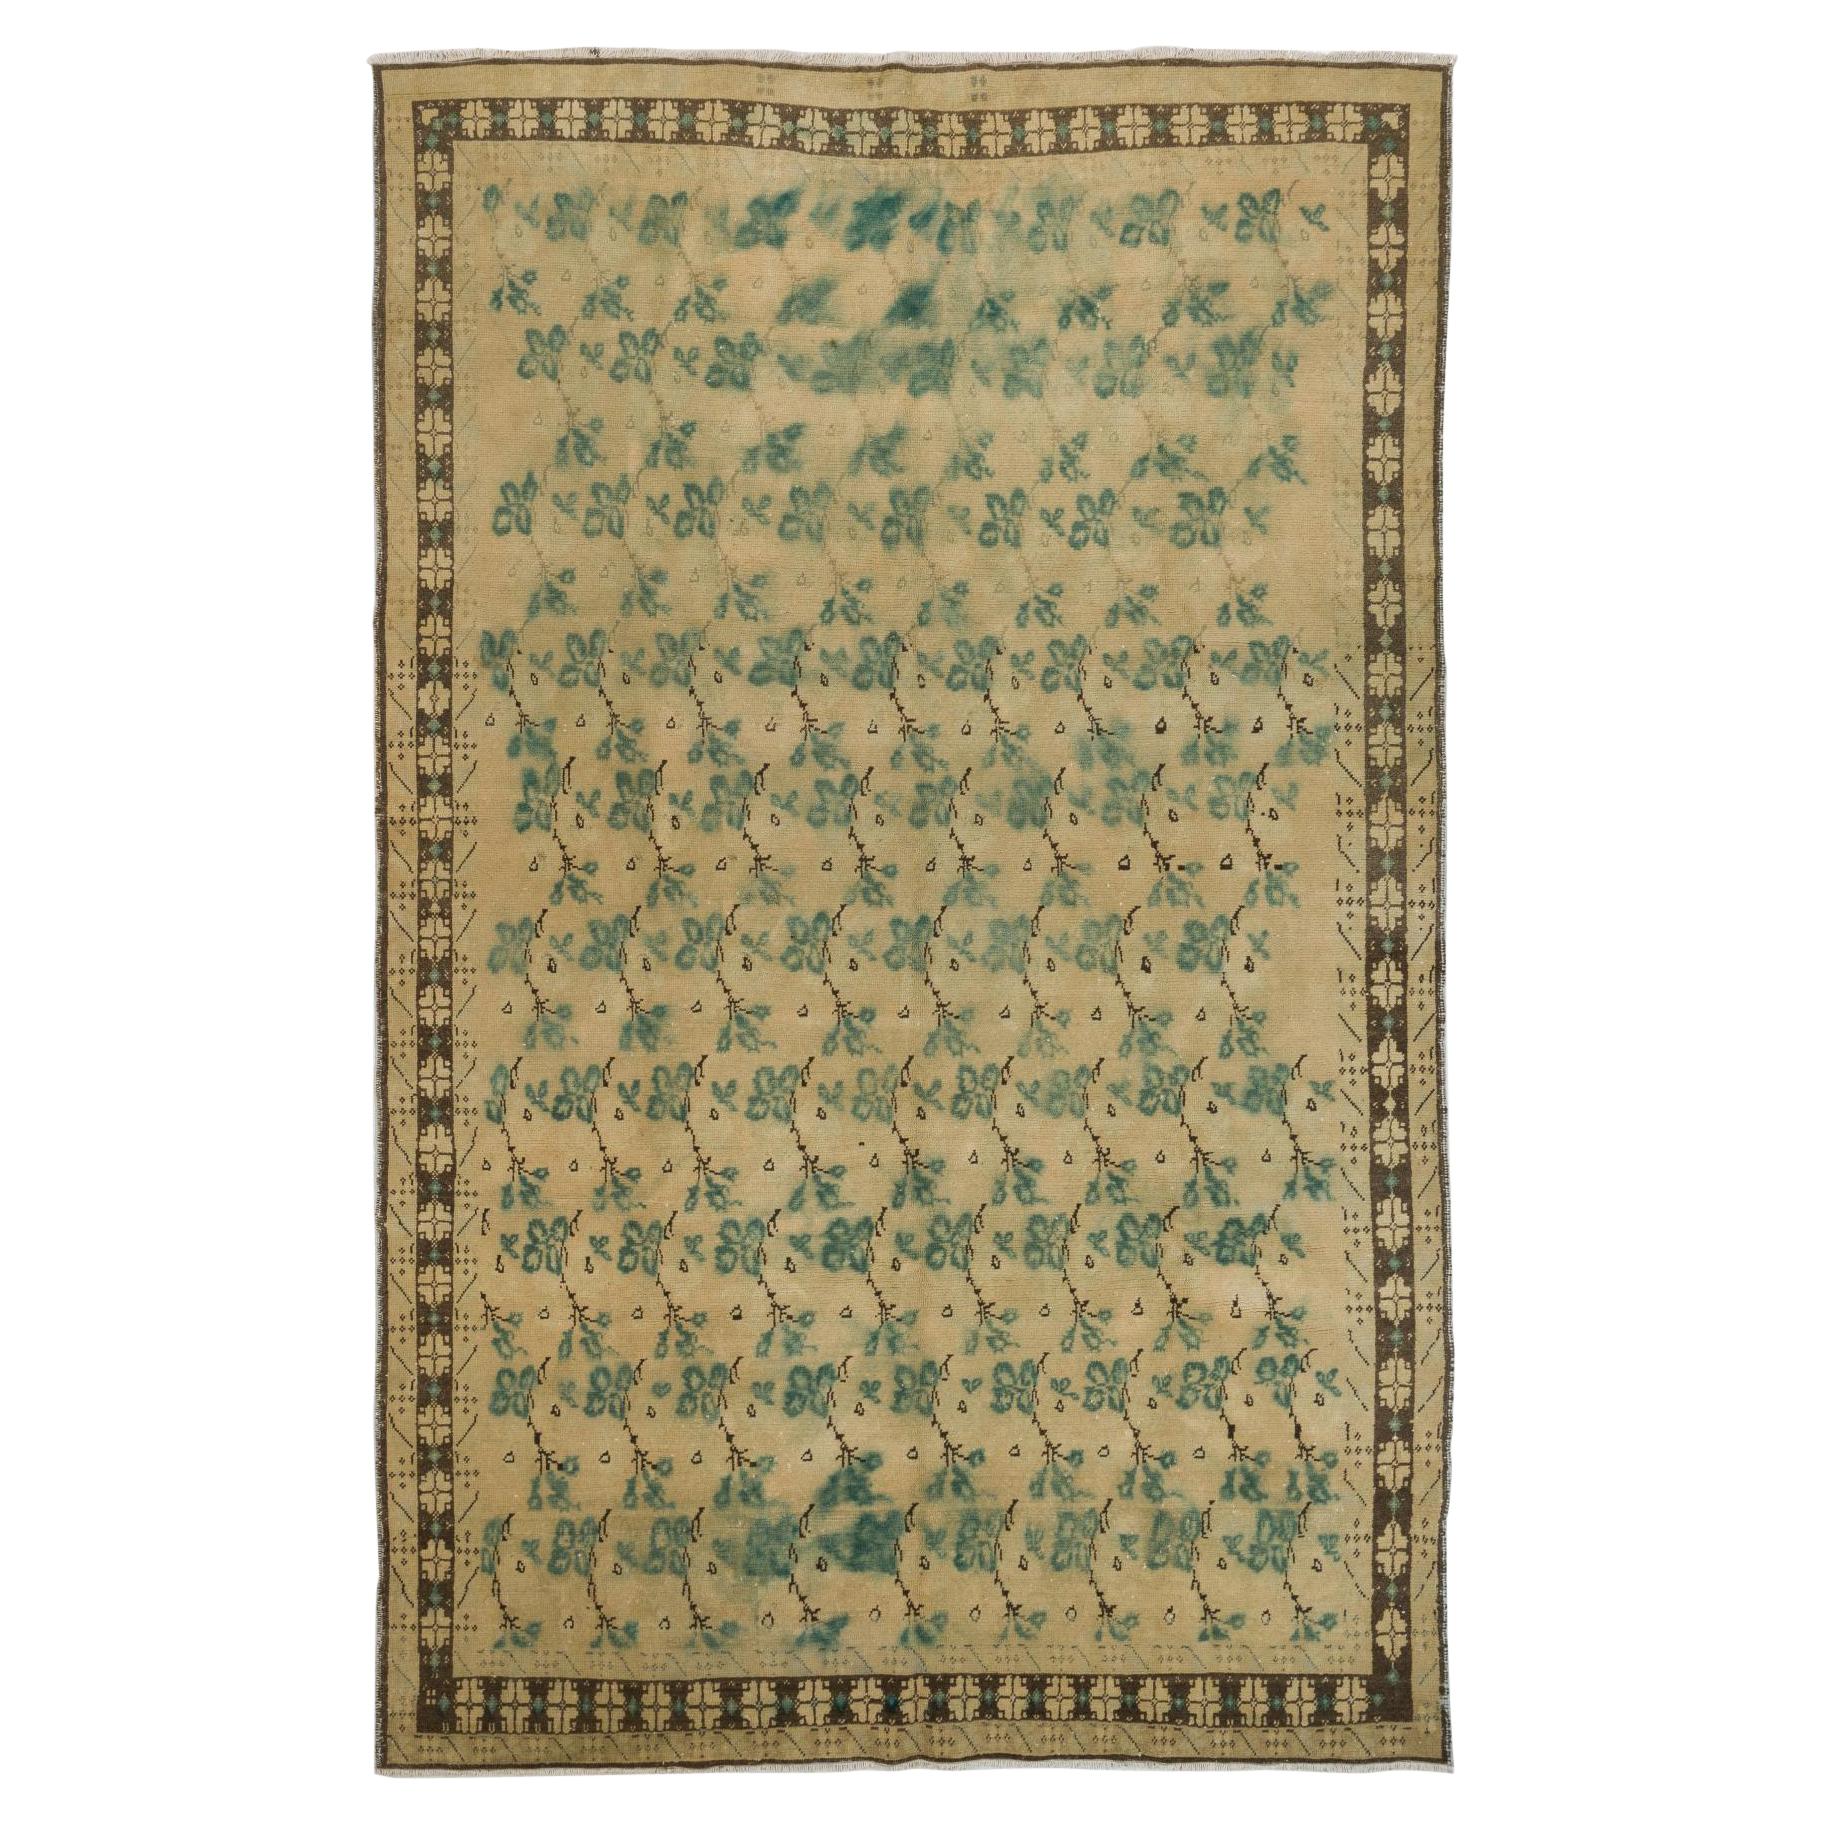 7.4x12 Ft Vintage Handmade Turkish Wool Rug in Beige, Green and Brown Colors For Sale